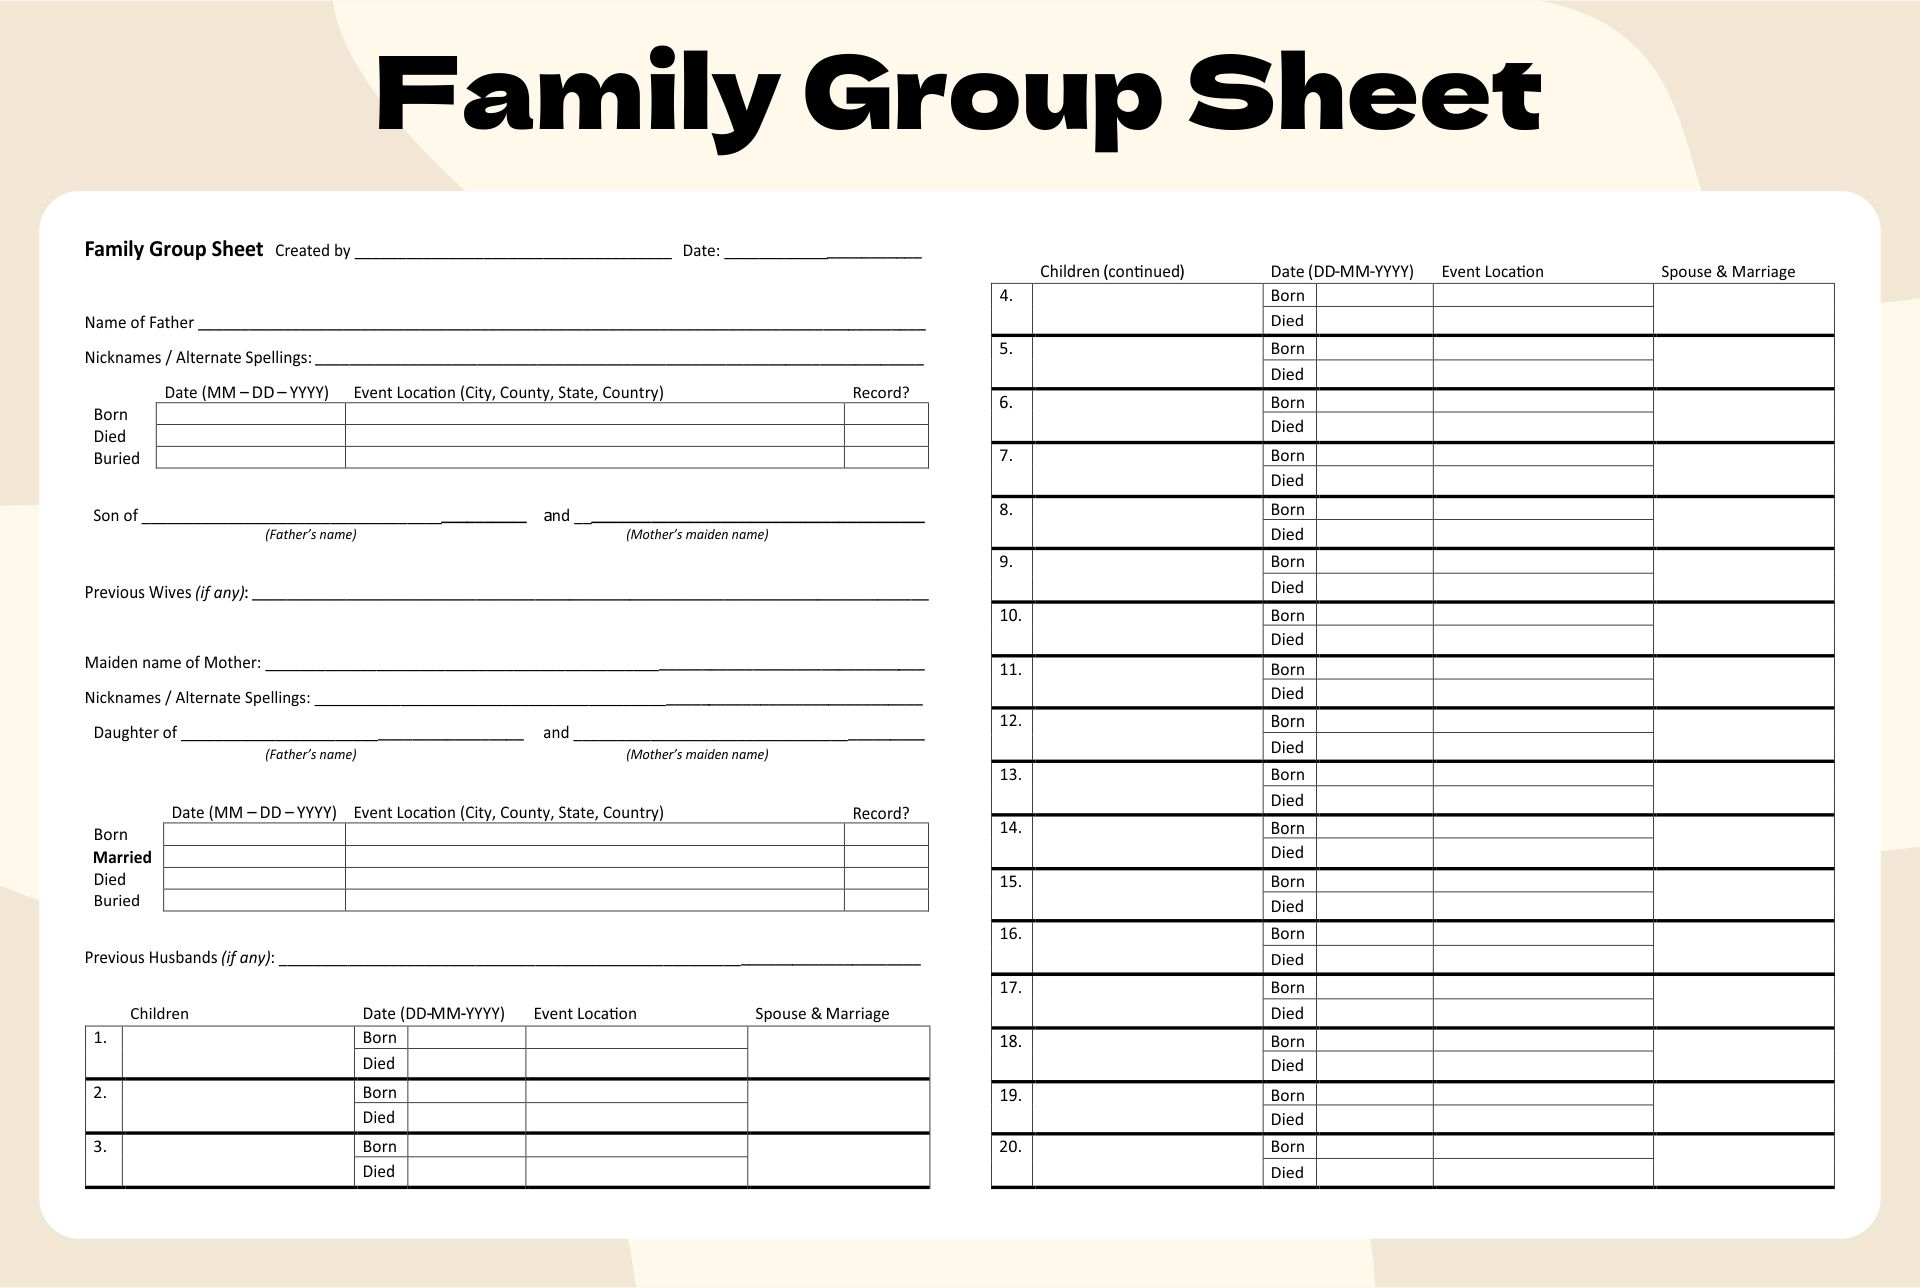 LDS Family Group Sheet Form